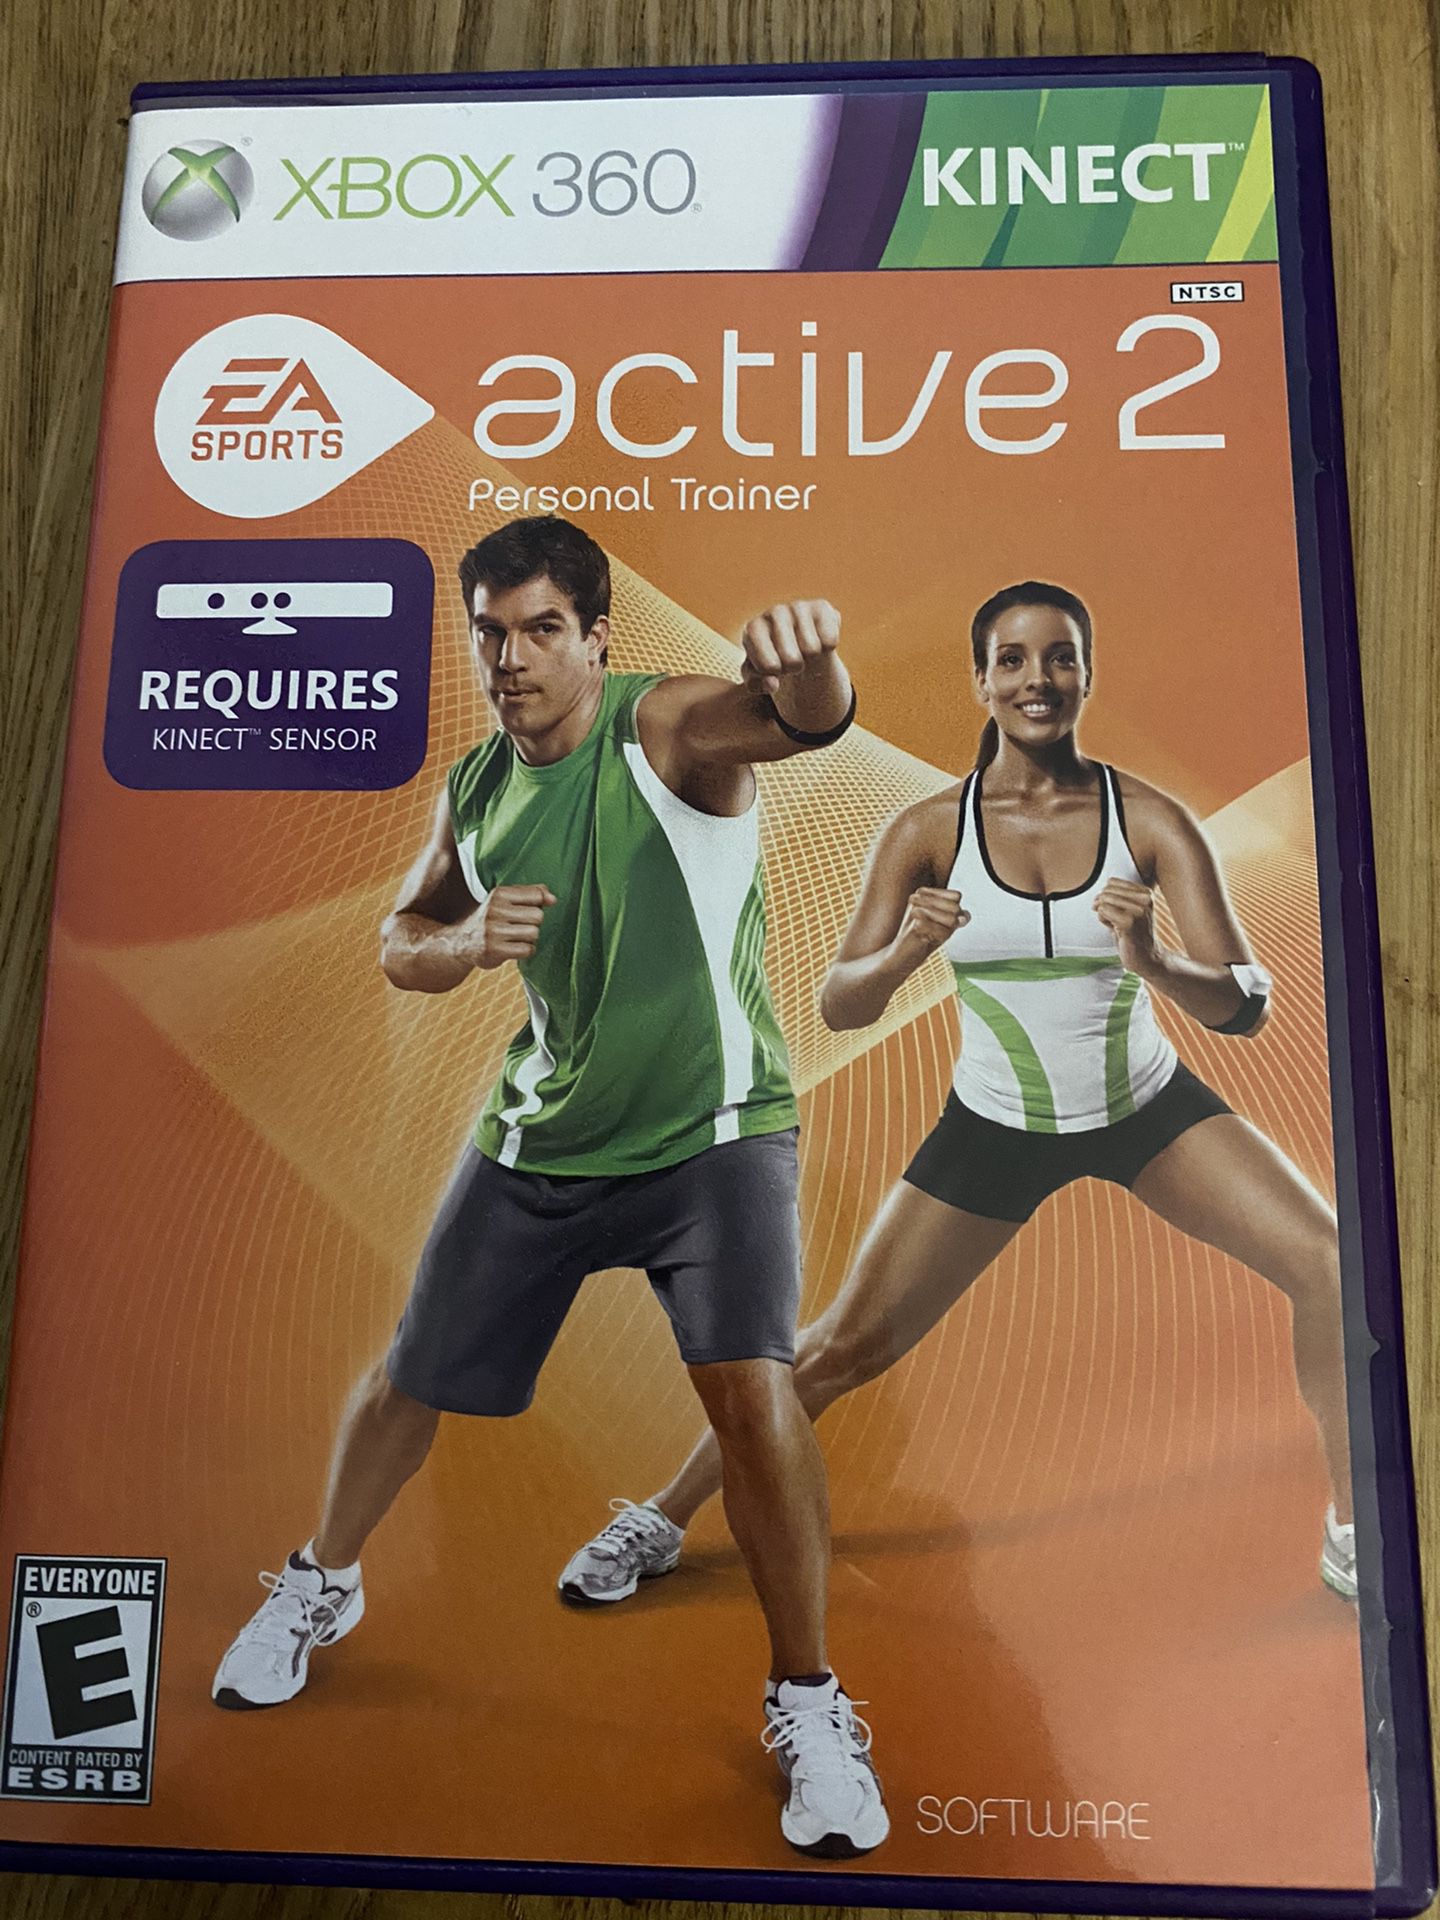 XBOX 360 Active 2 Personal Trainer game